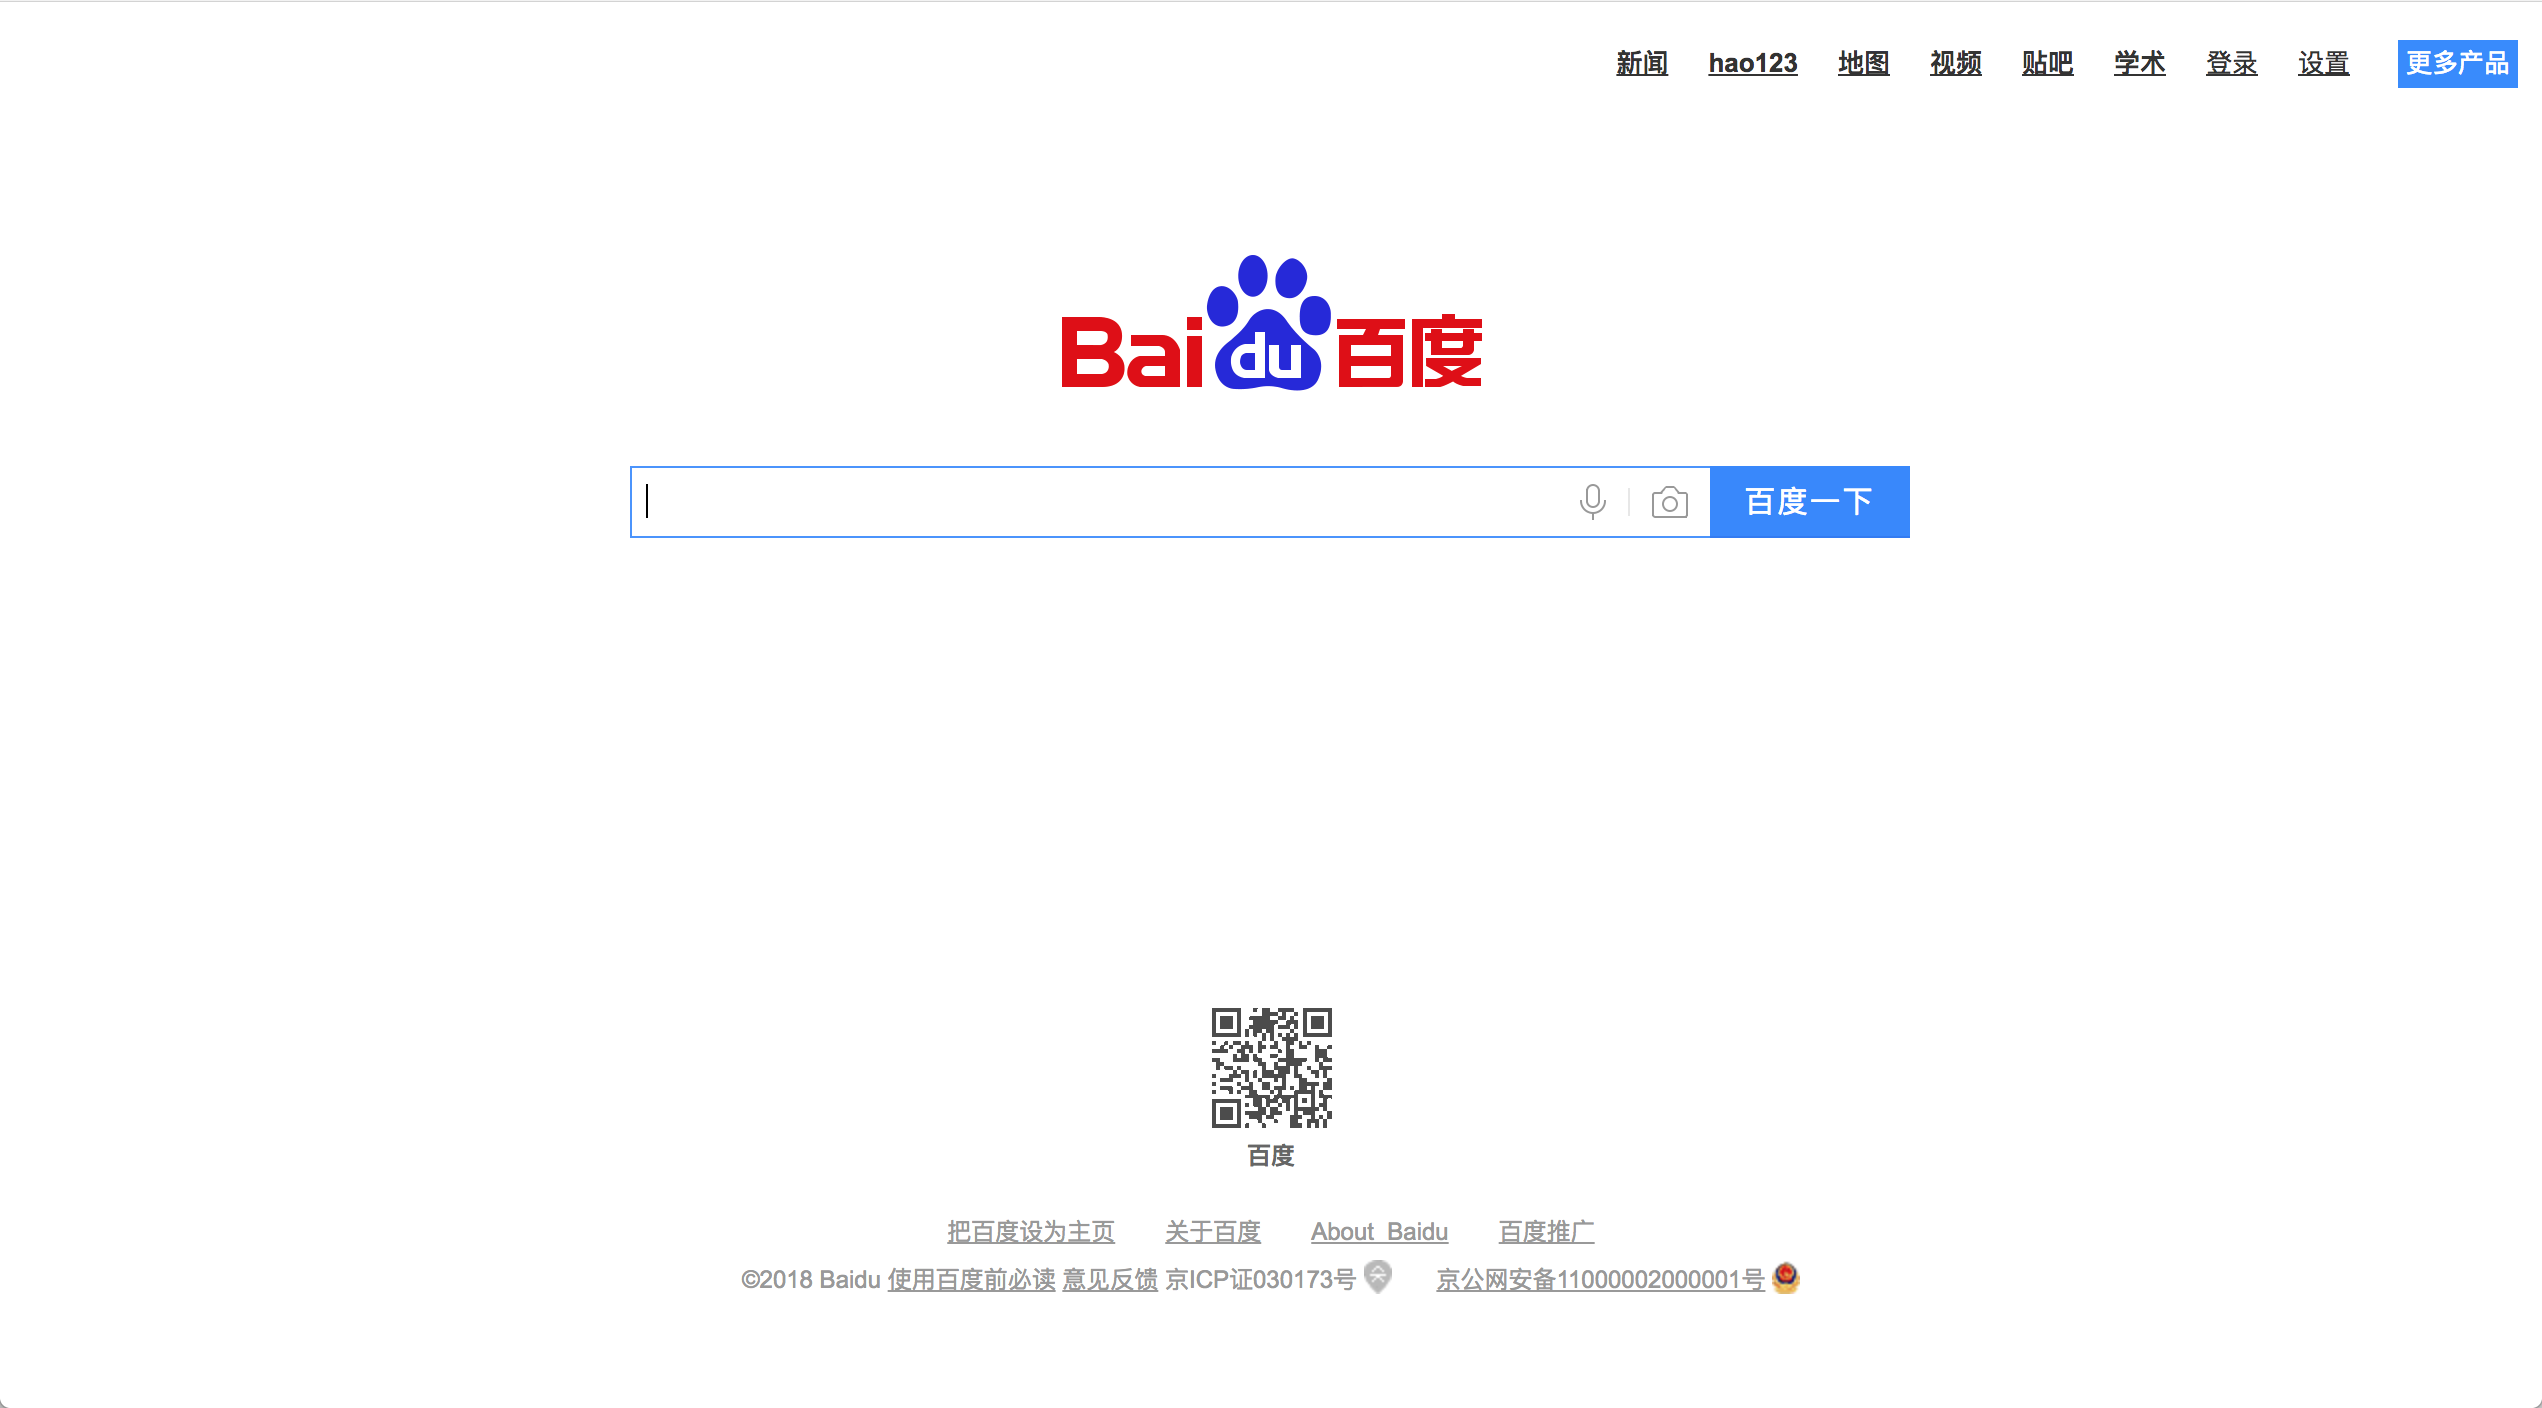 an image of the Baidu search screen